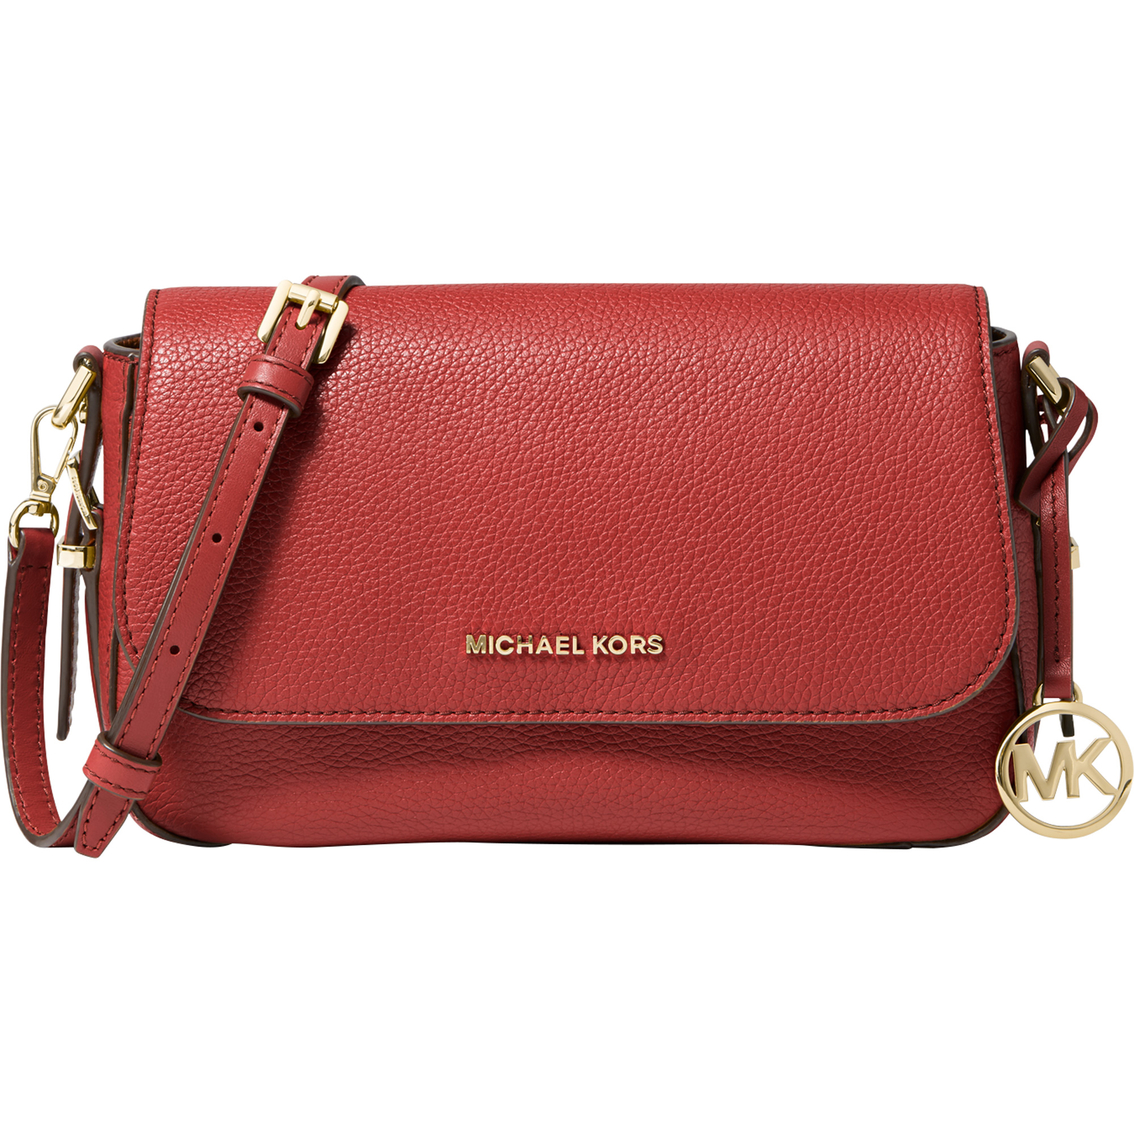 MICHAEL KORS CROSSBODY REVIEW  WHAT CAN WE DO ABOUT GUN CONTROL ISSUE 